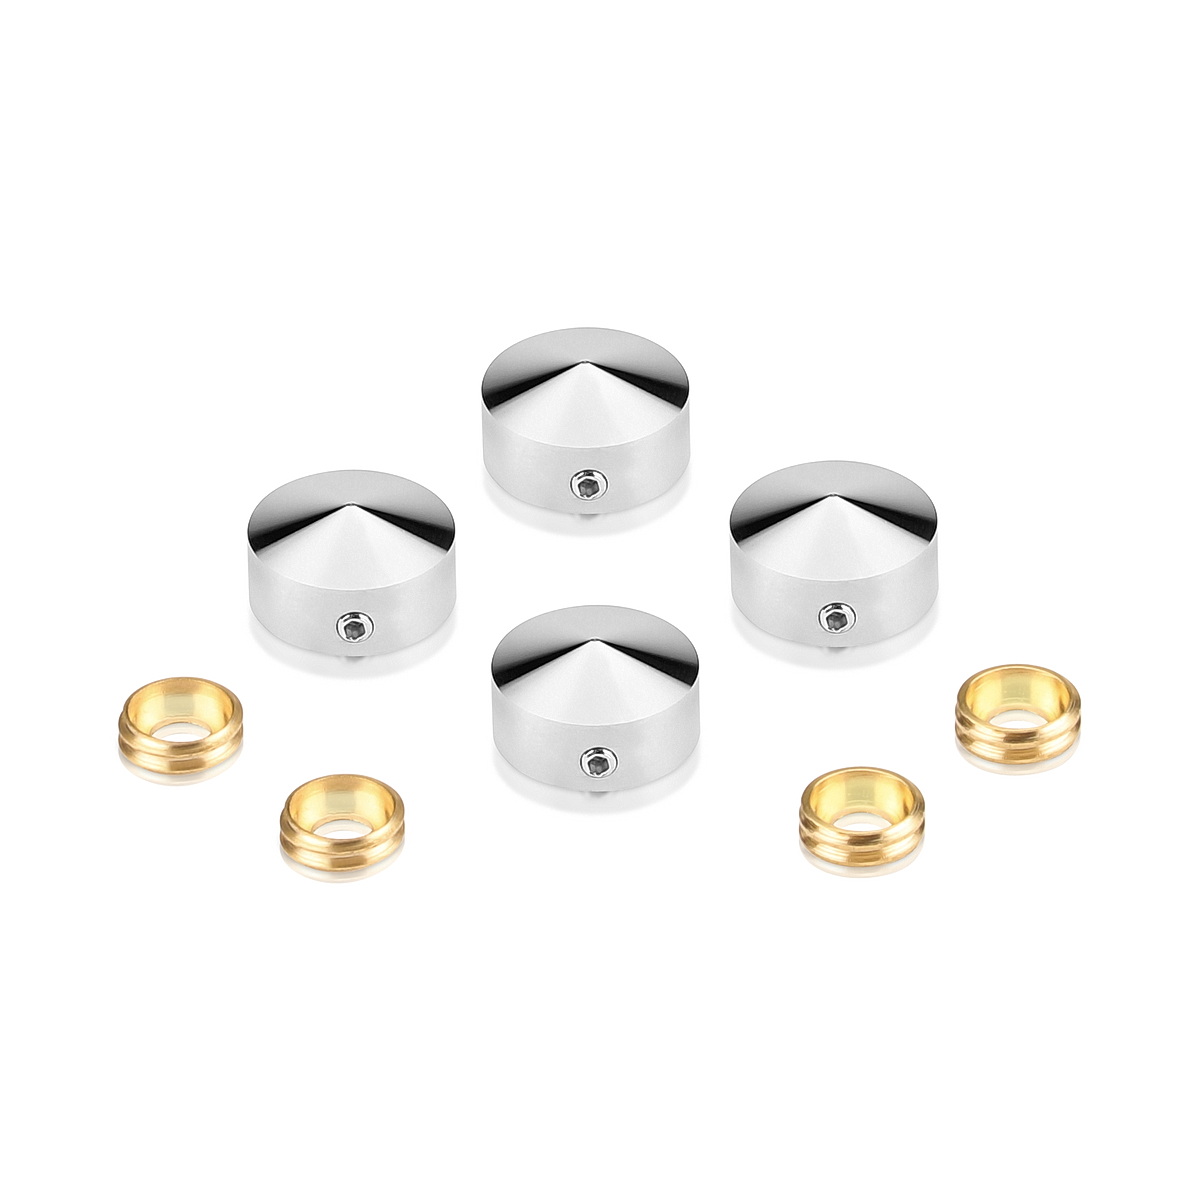 Set of 4 Conical Locking Screw Cover Diameter 5/8'', Satin Brushed Stainless Steel Finish (Indoor Use Only)